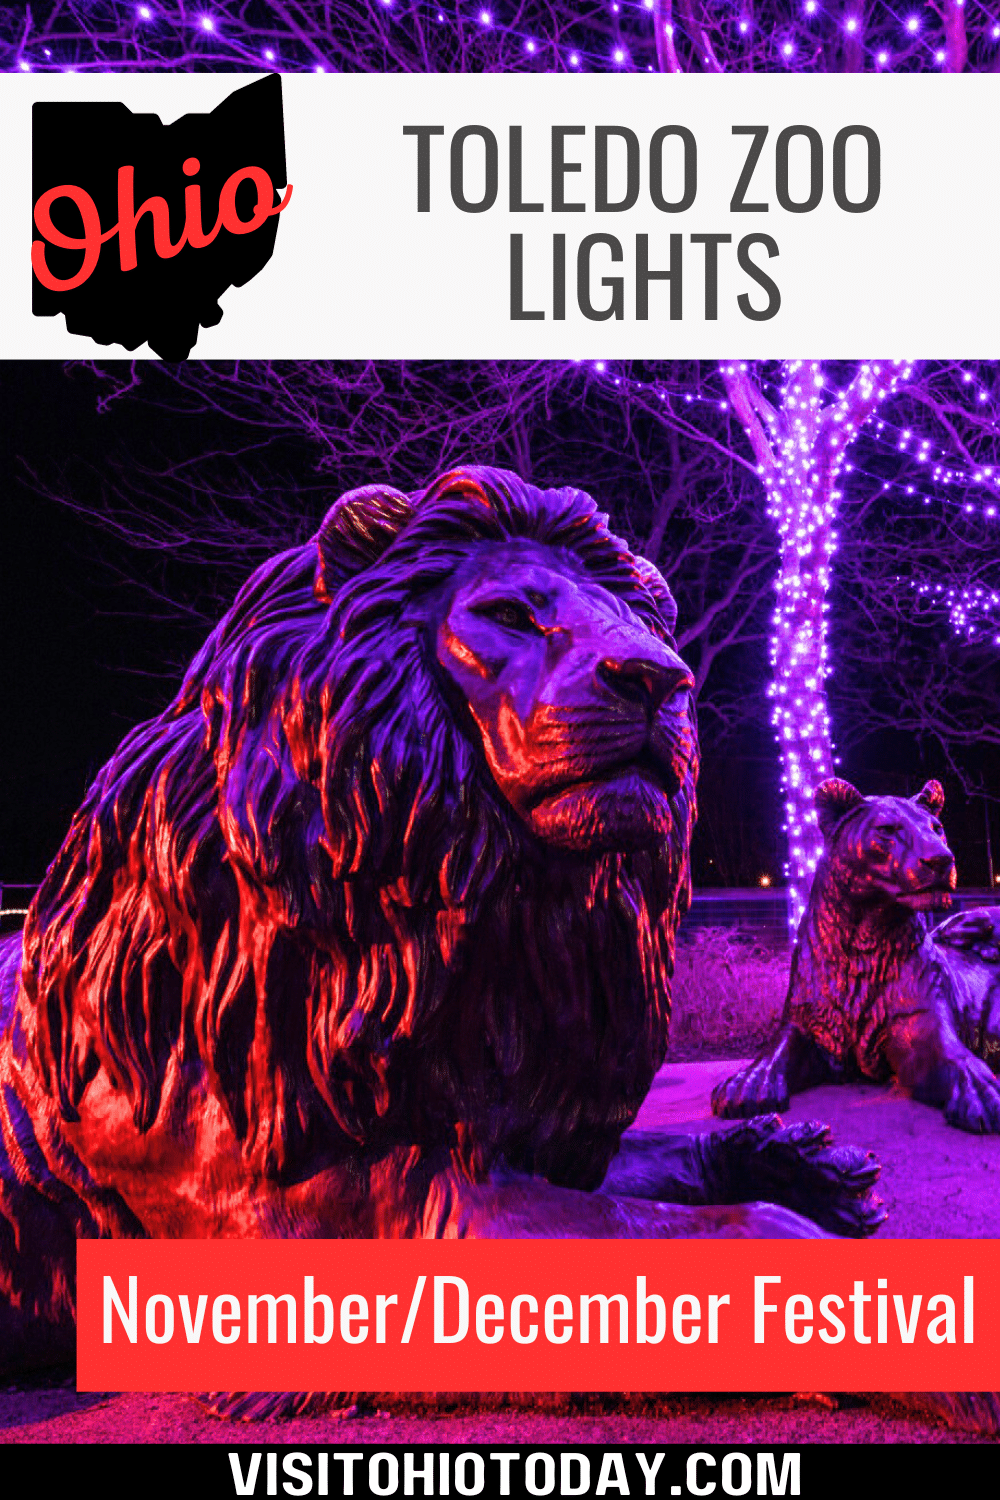 The Toledo Zoo Lights Before Christmas is an annual holiday lights festival at the Toledo Zoo from Friday, November 17 to Sunday, December 31, 2023.